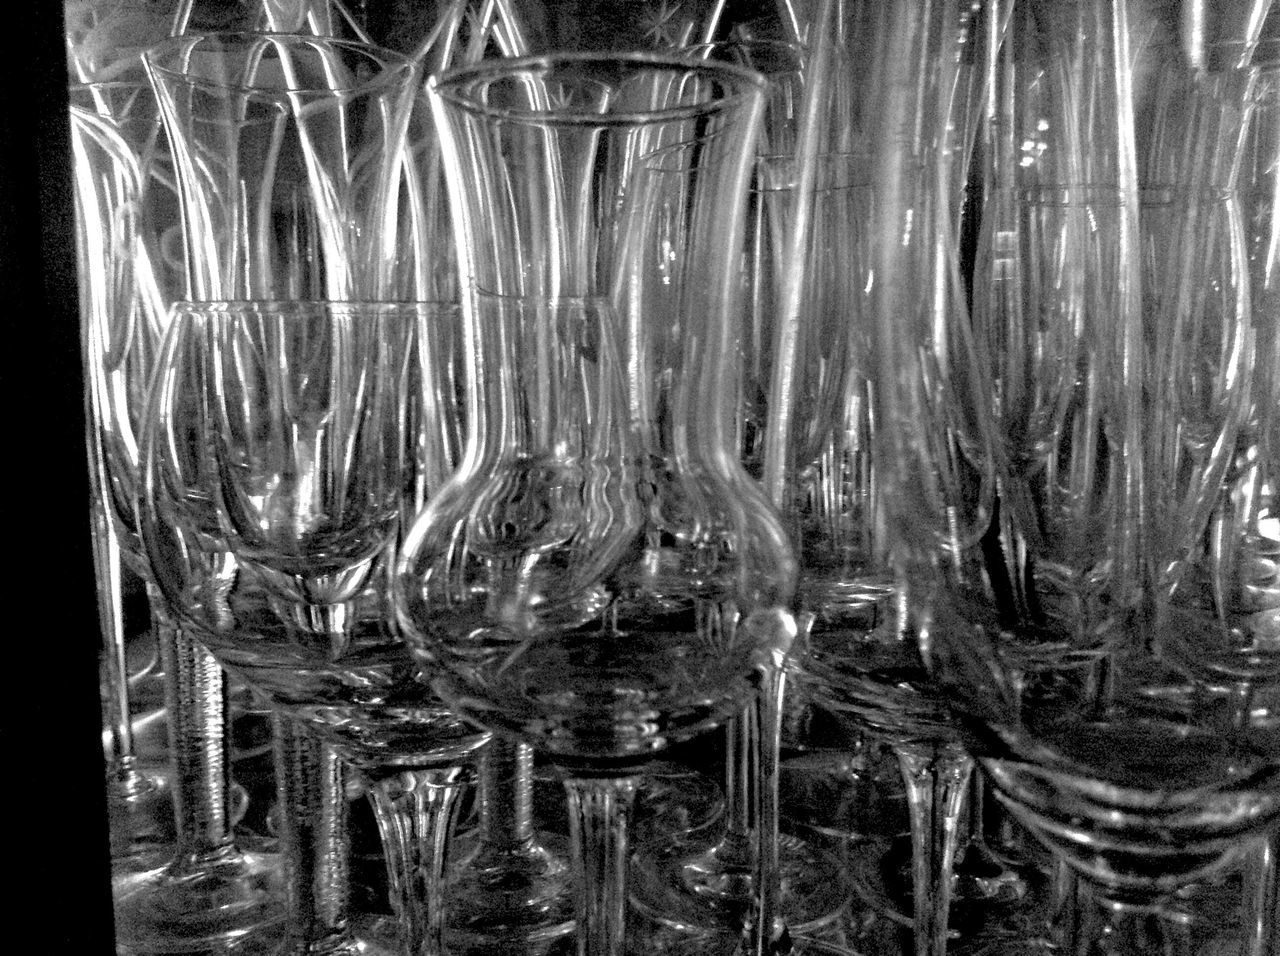 Glasses waiting for the guests?